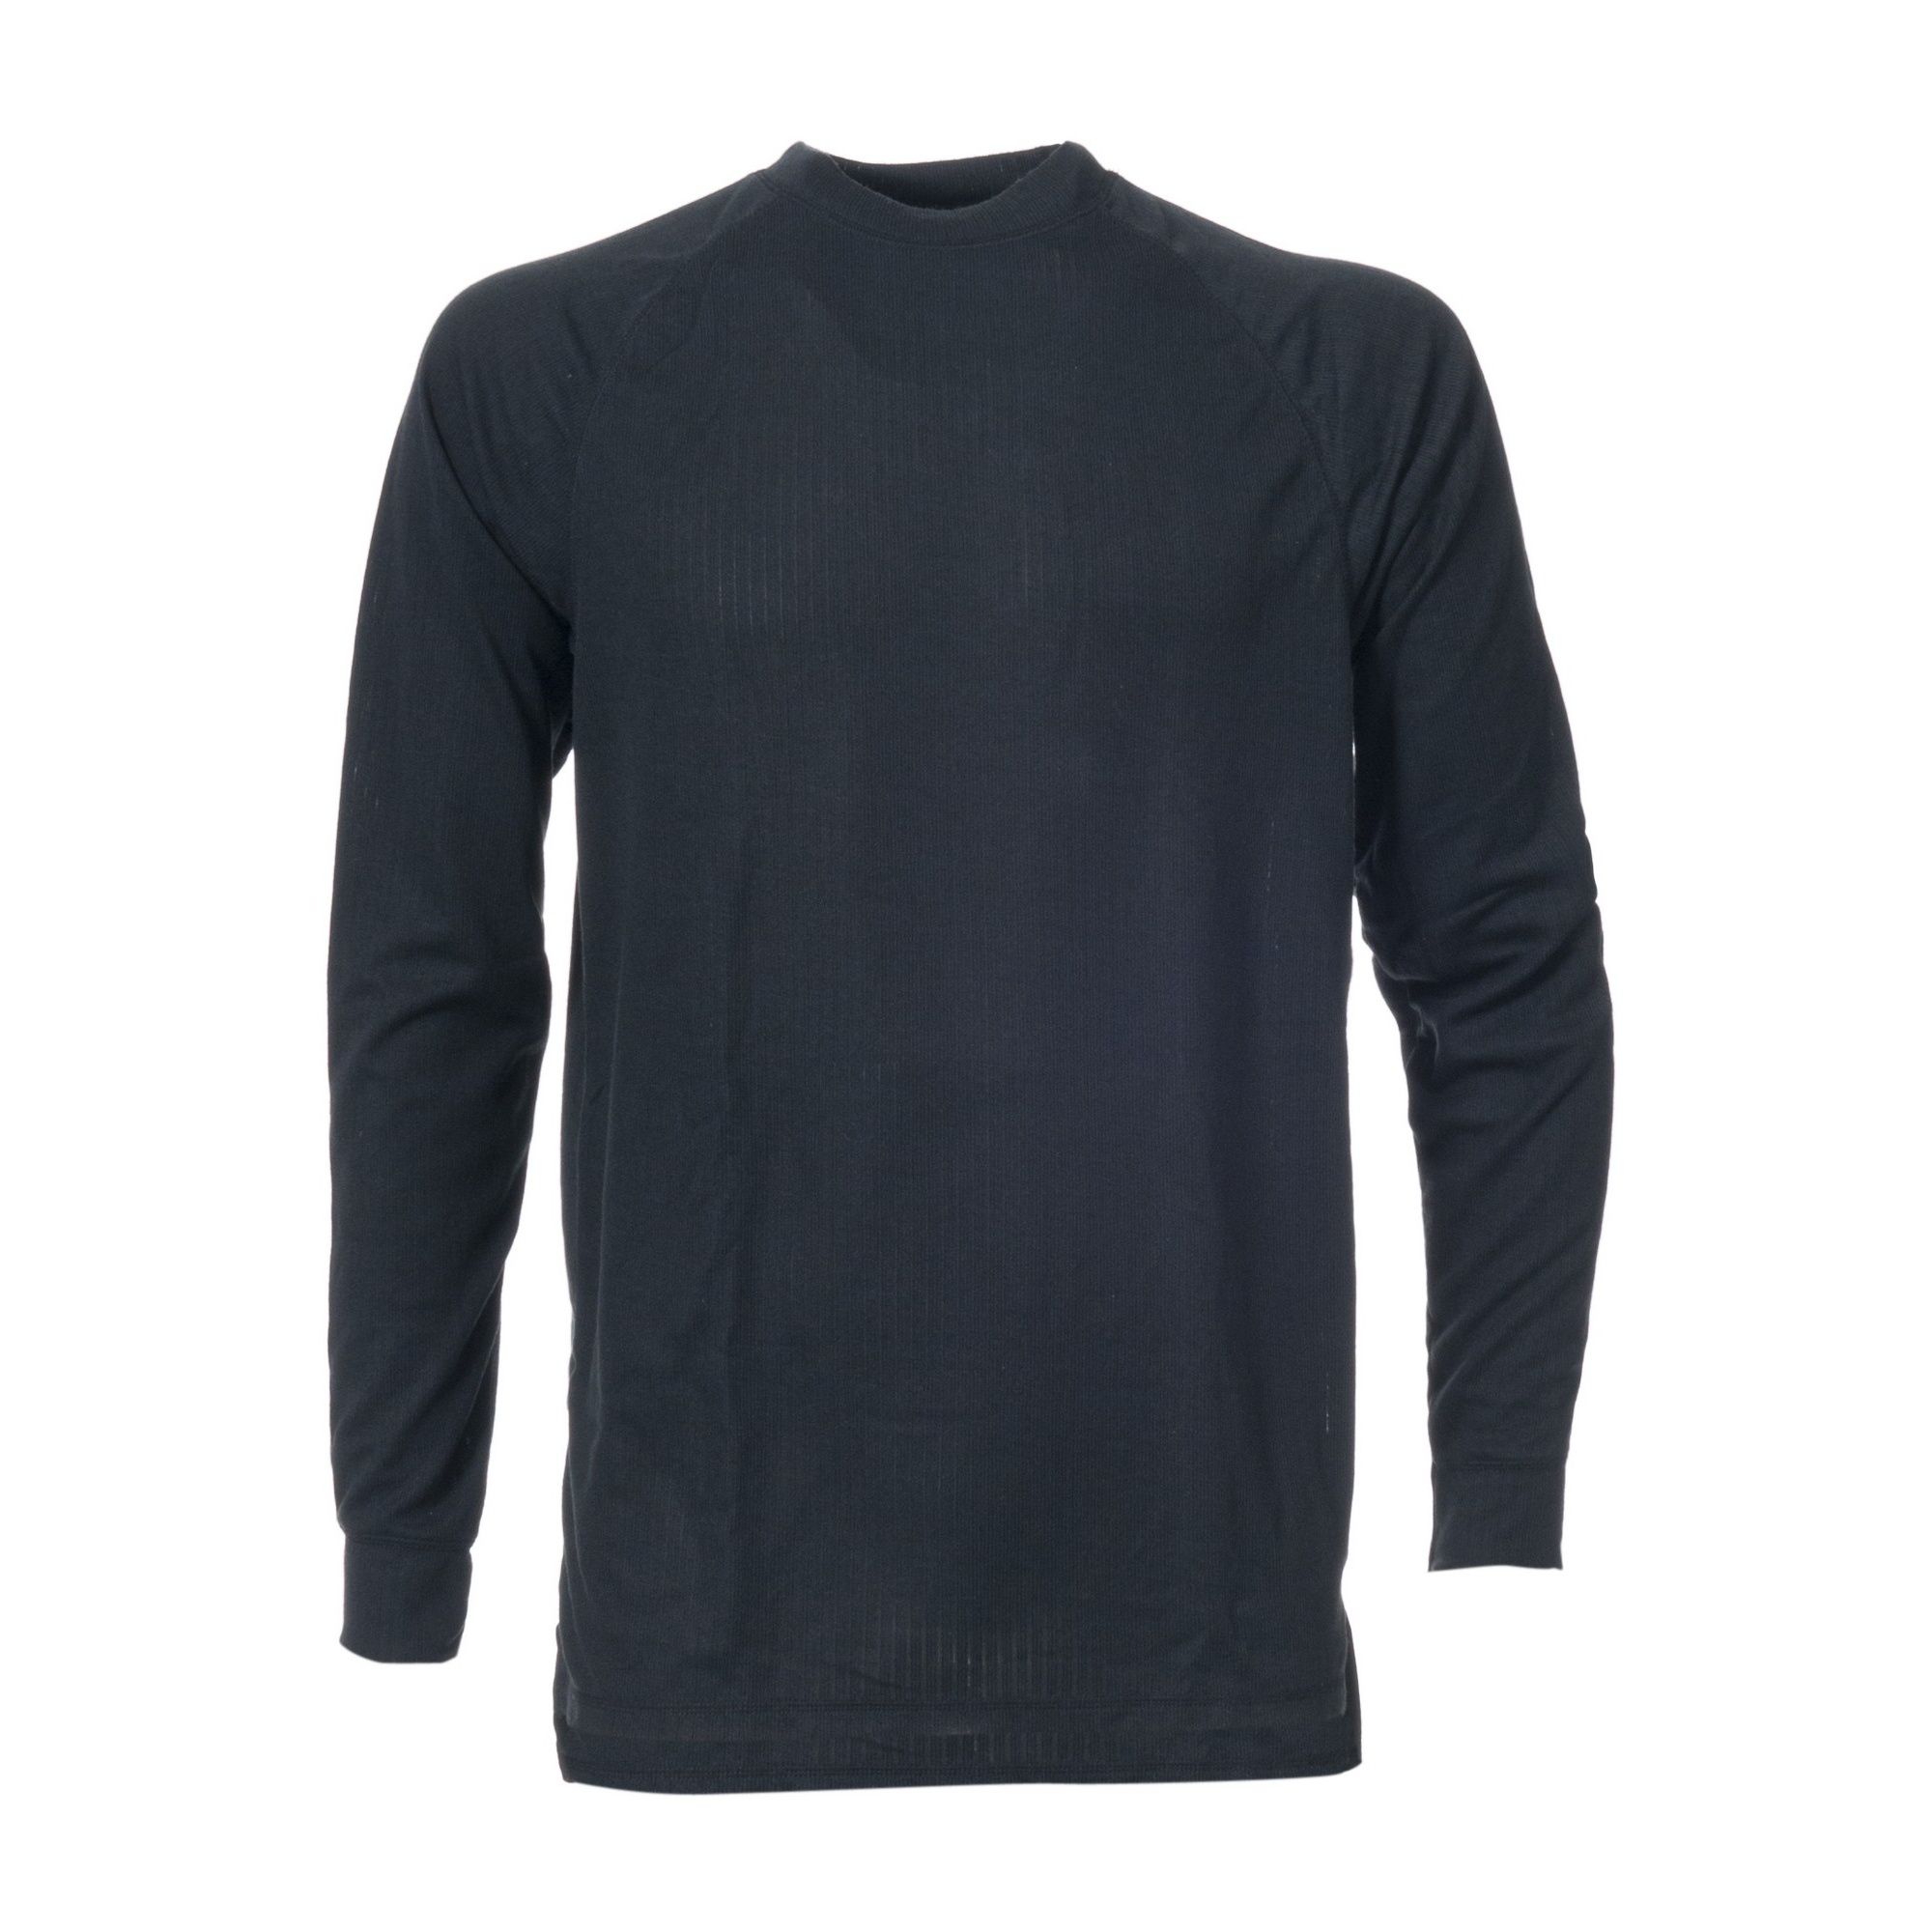 Crew Neck. Long Sleeves. Flat Seams For Comfort. Deep Cuffs. Side Splits. Quick Drying. 100% Polyester. Rib: 170gms.